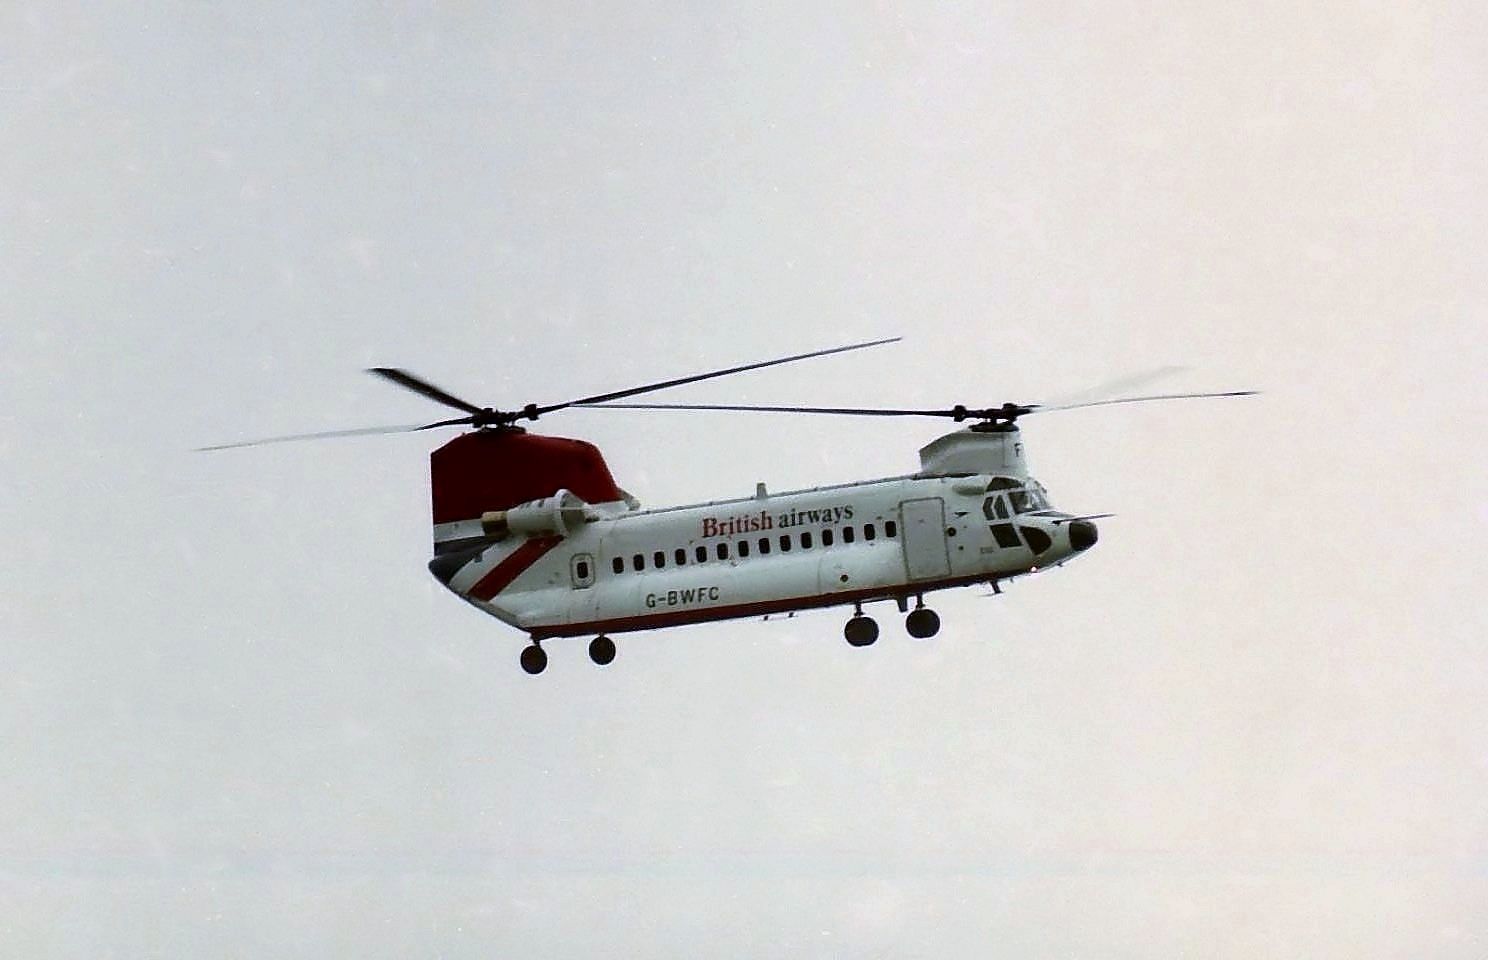 A British Airways Helicopter flying in the sky.